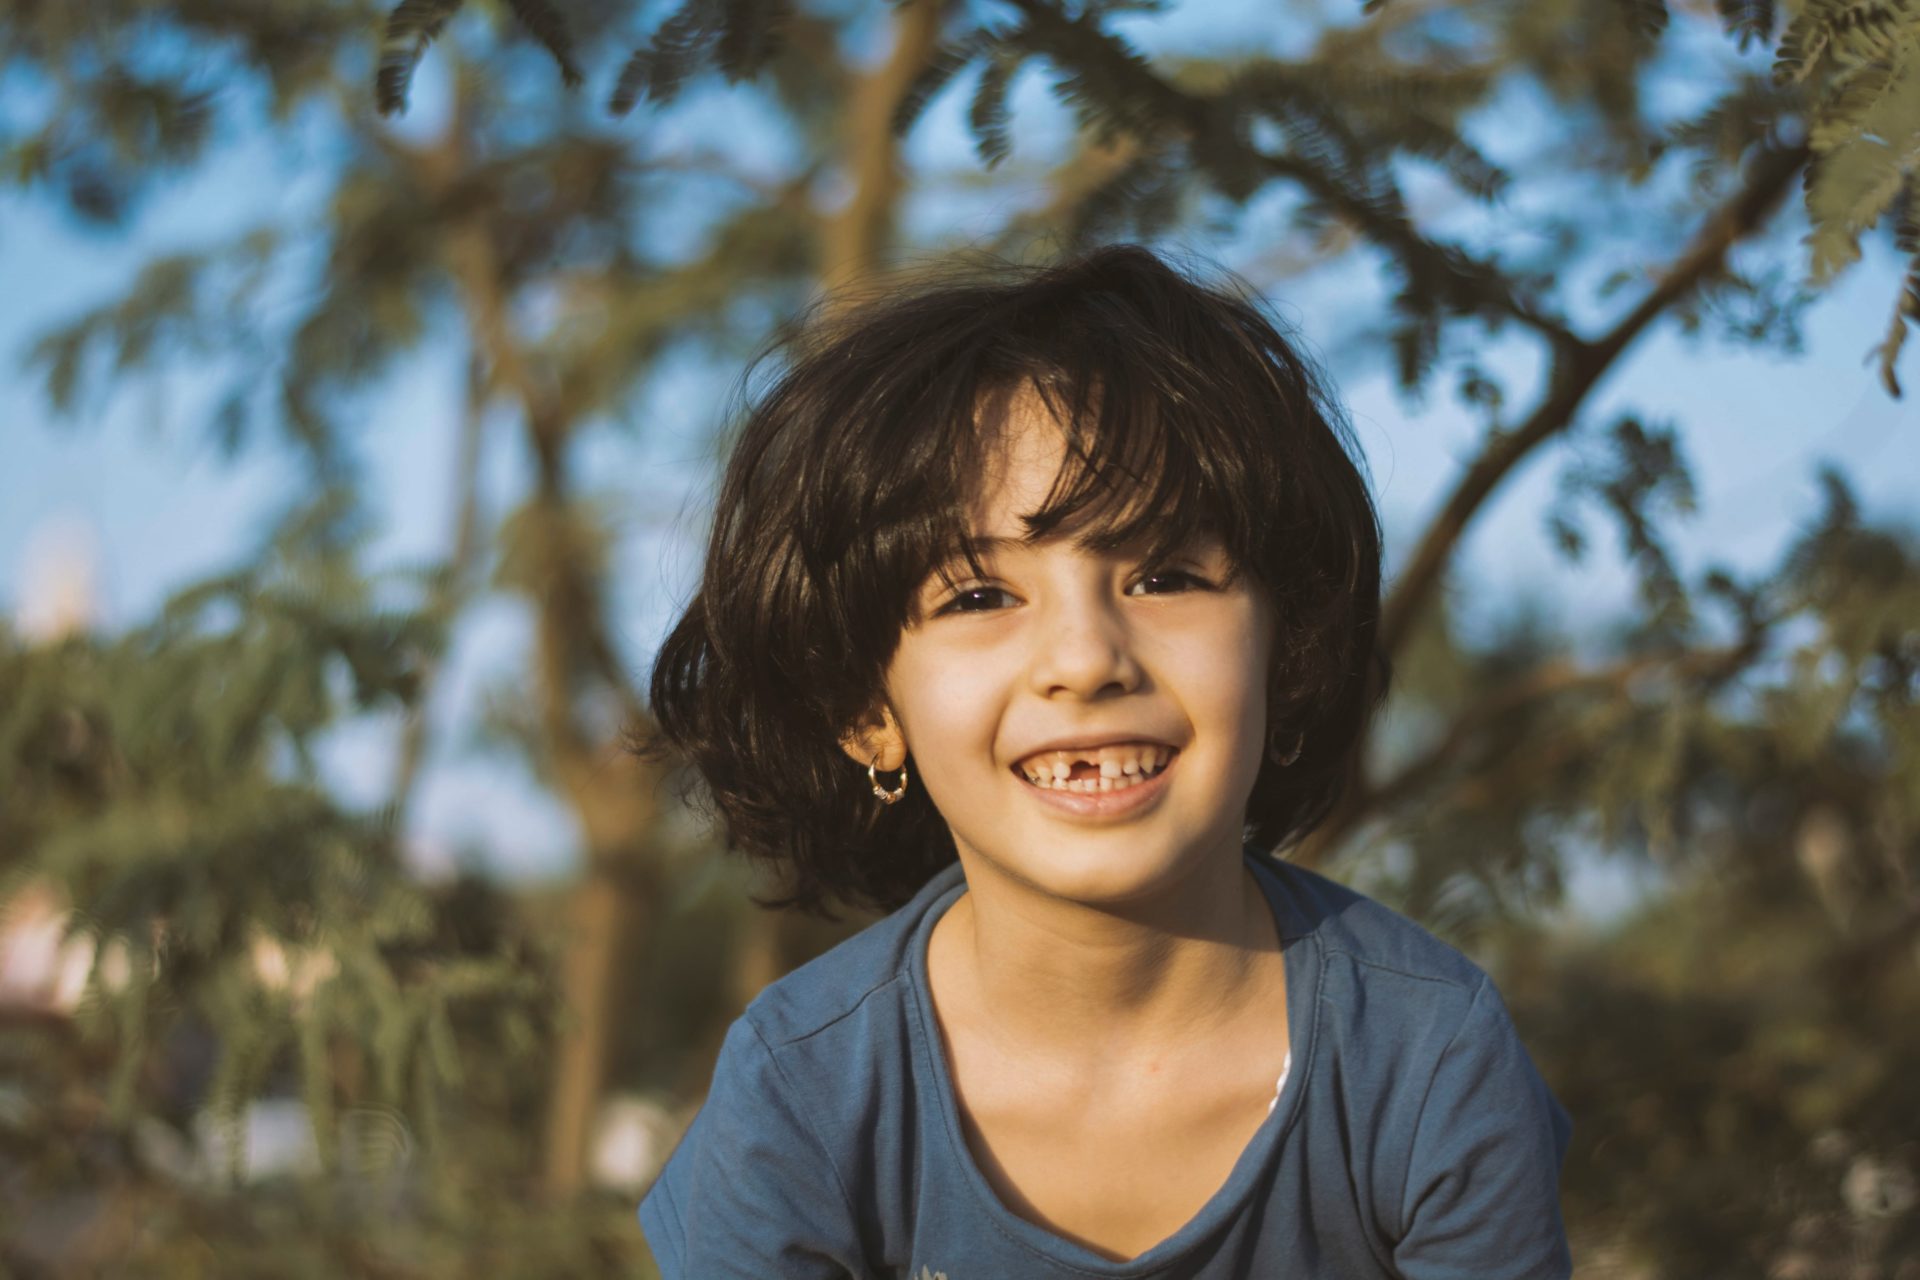 What You Should Know About Your Child’s Loose Tooth